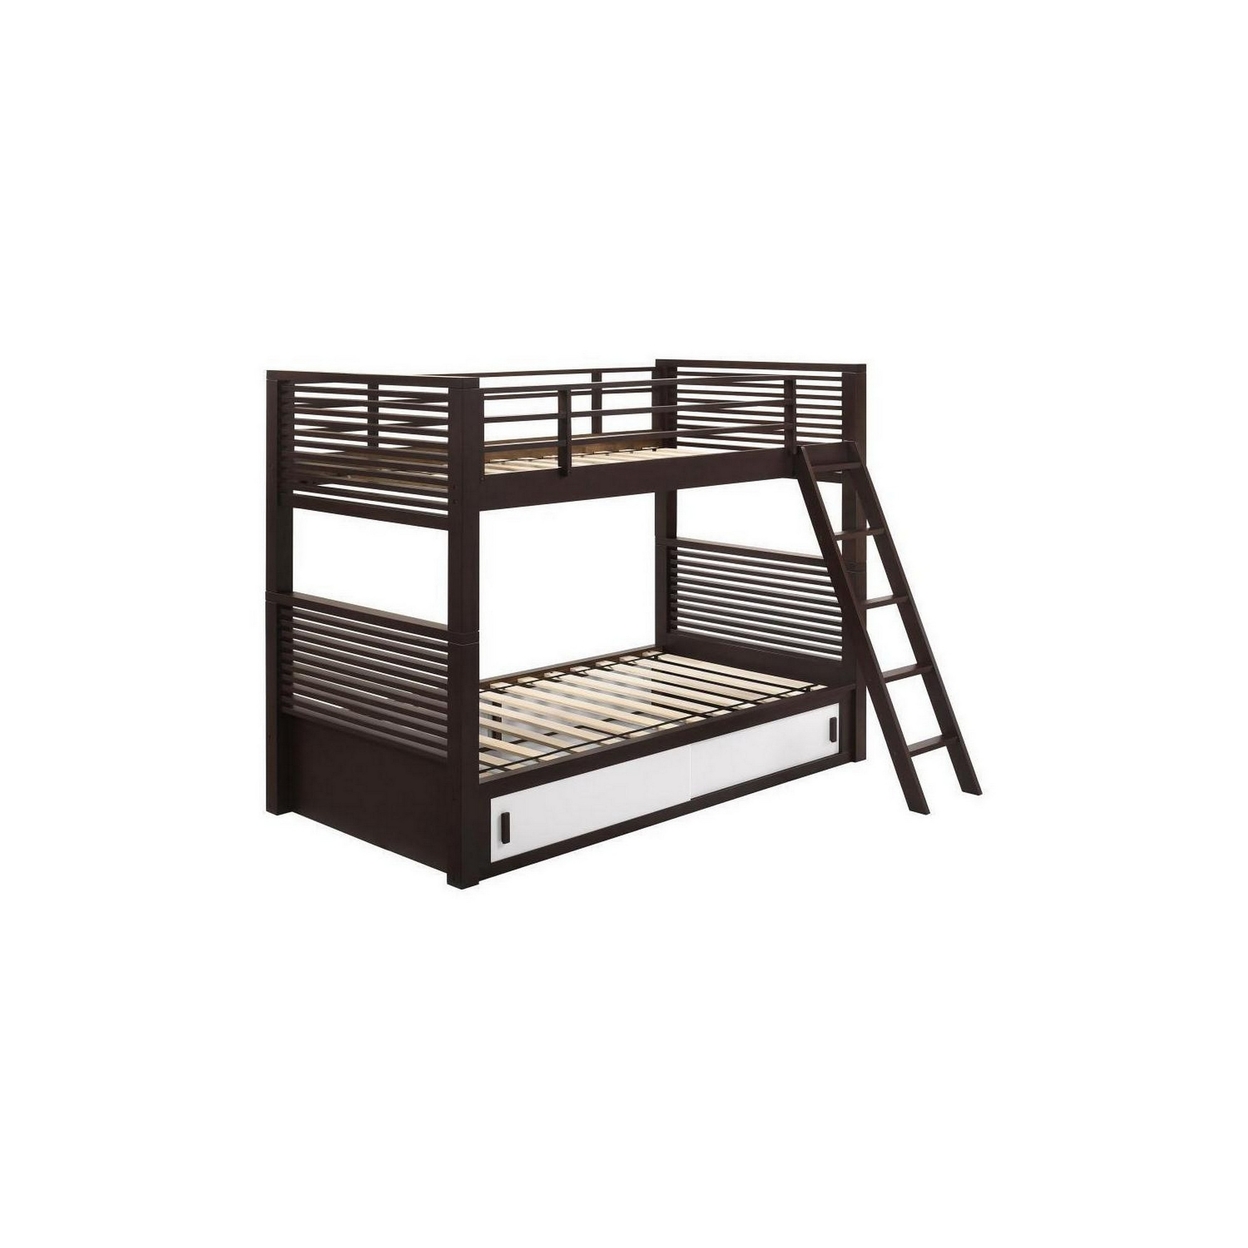 Twin Over Twin Bunk Beds With Ladder, Guardrails, And Storage, Brown Finish- Saltoro Sherpi